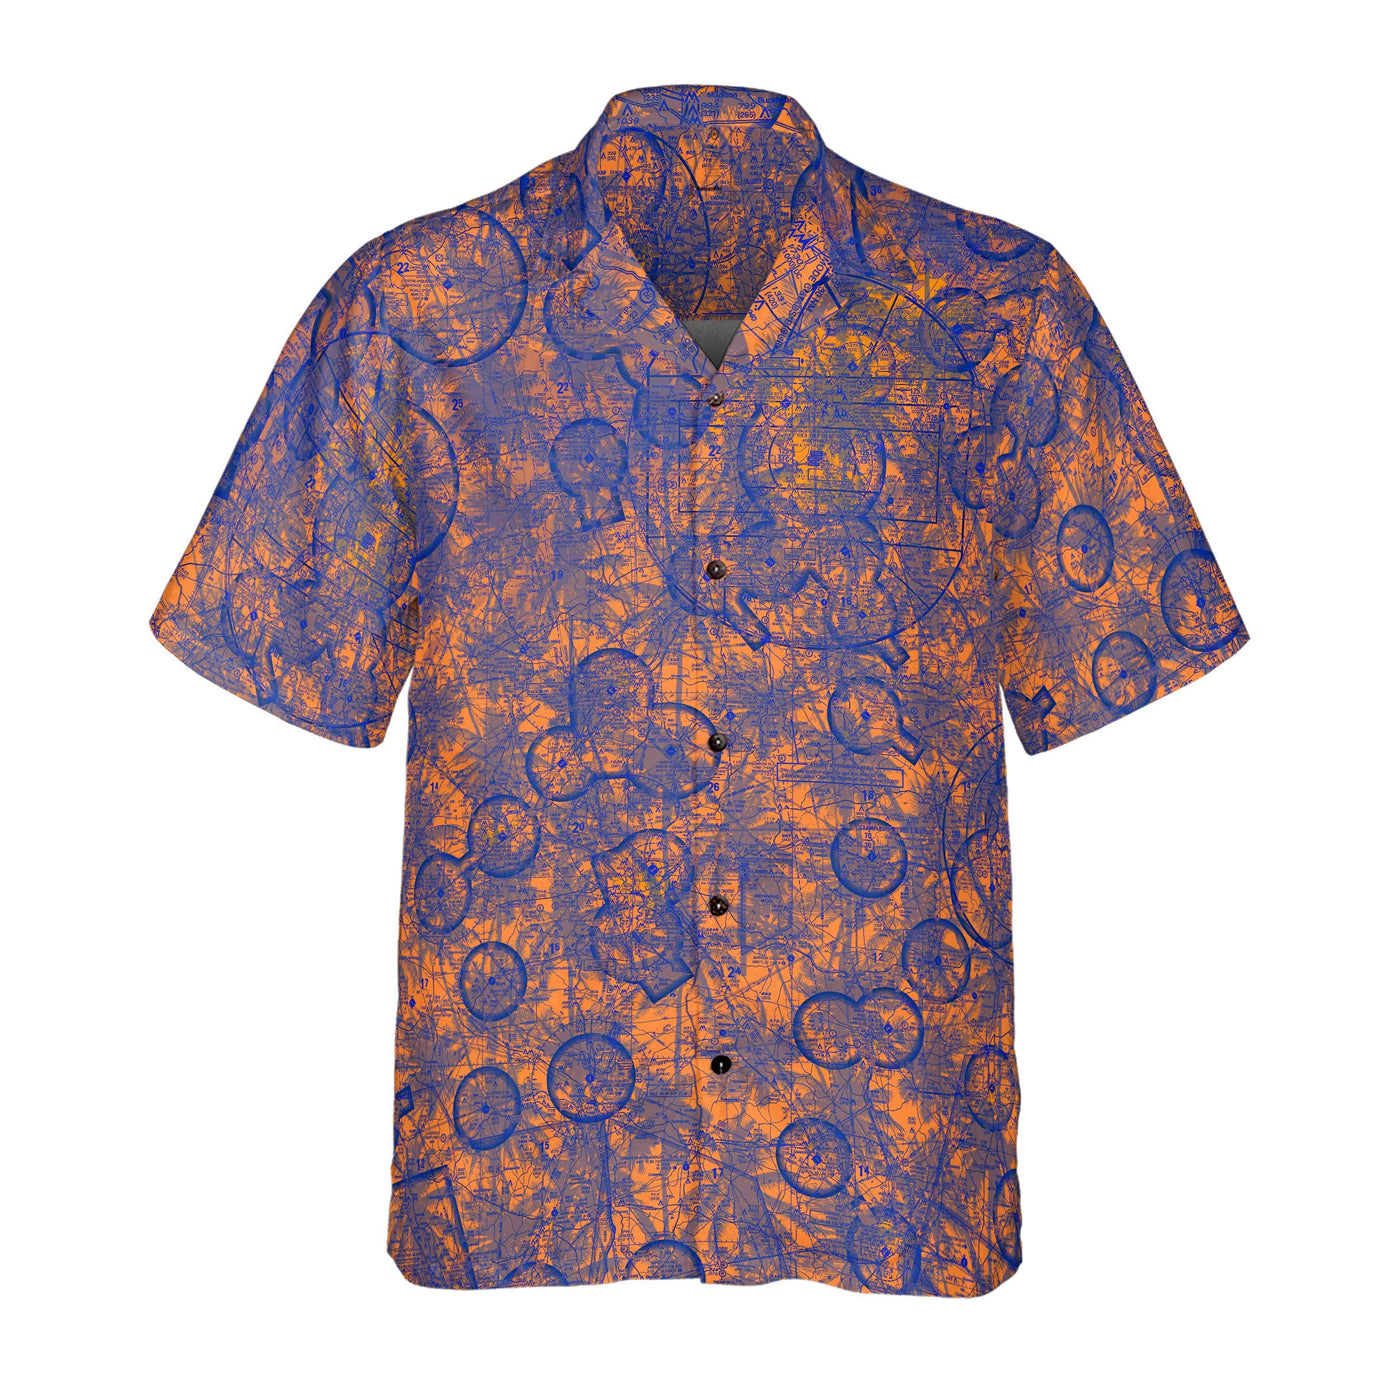 AOP Coconut Button Shirt The Palms in Orange and Blue Atlanta to Auburn VFR Coconut Button Camp Shirt